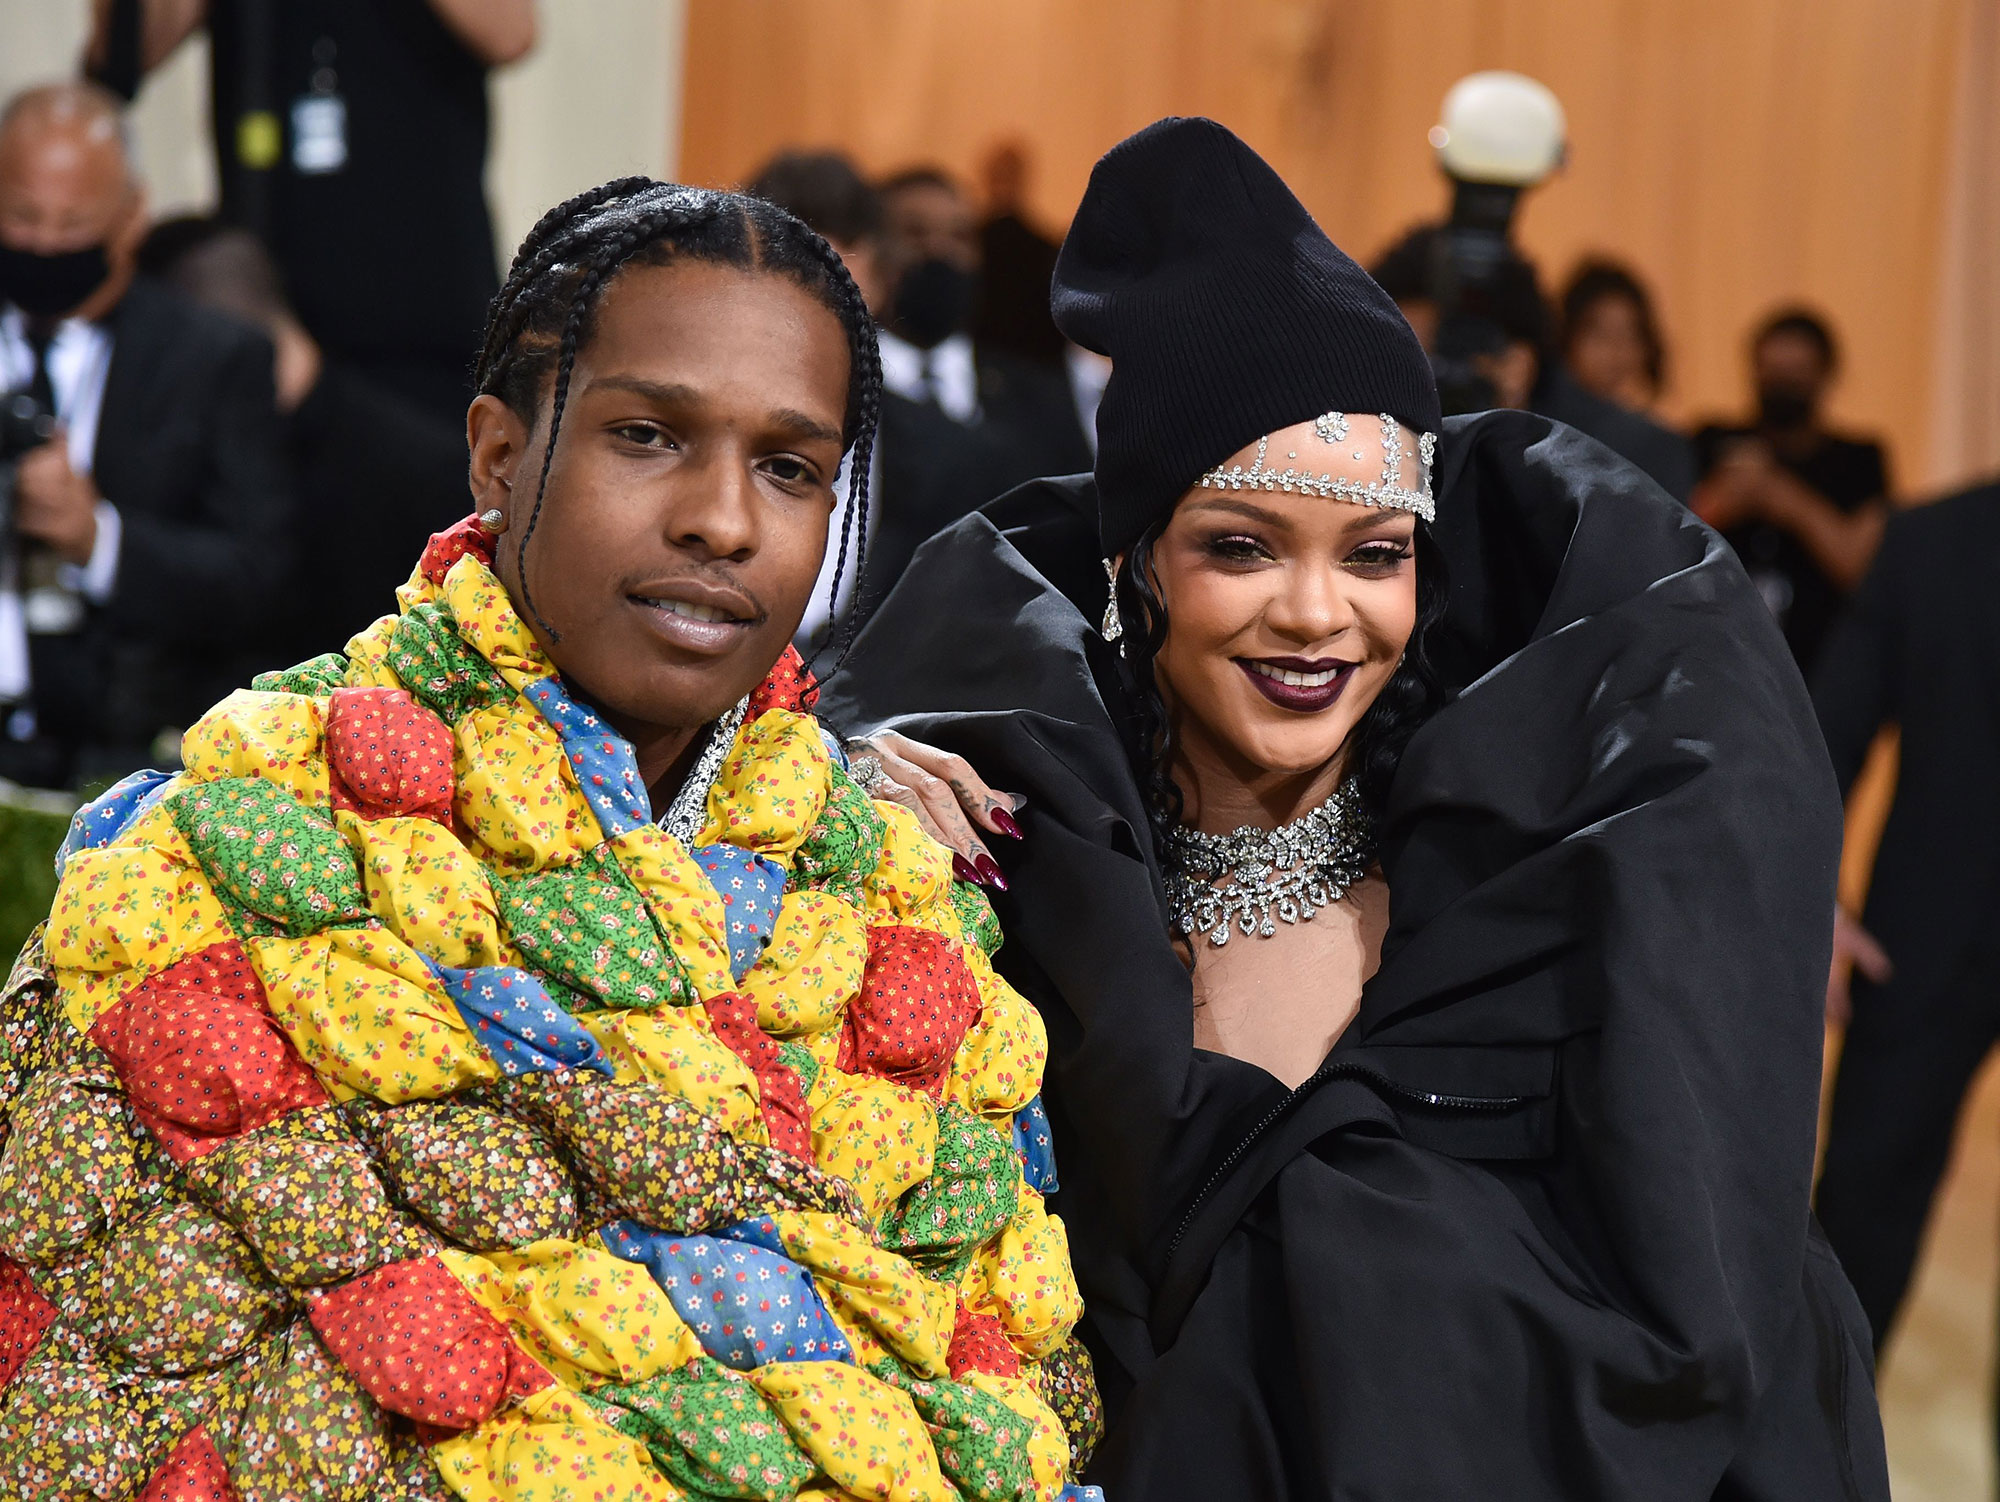 Are Asap Rocky And Rihanna Still Together?